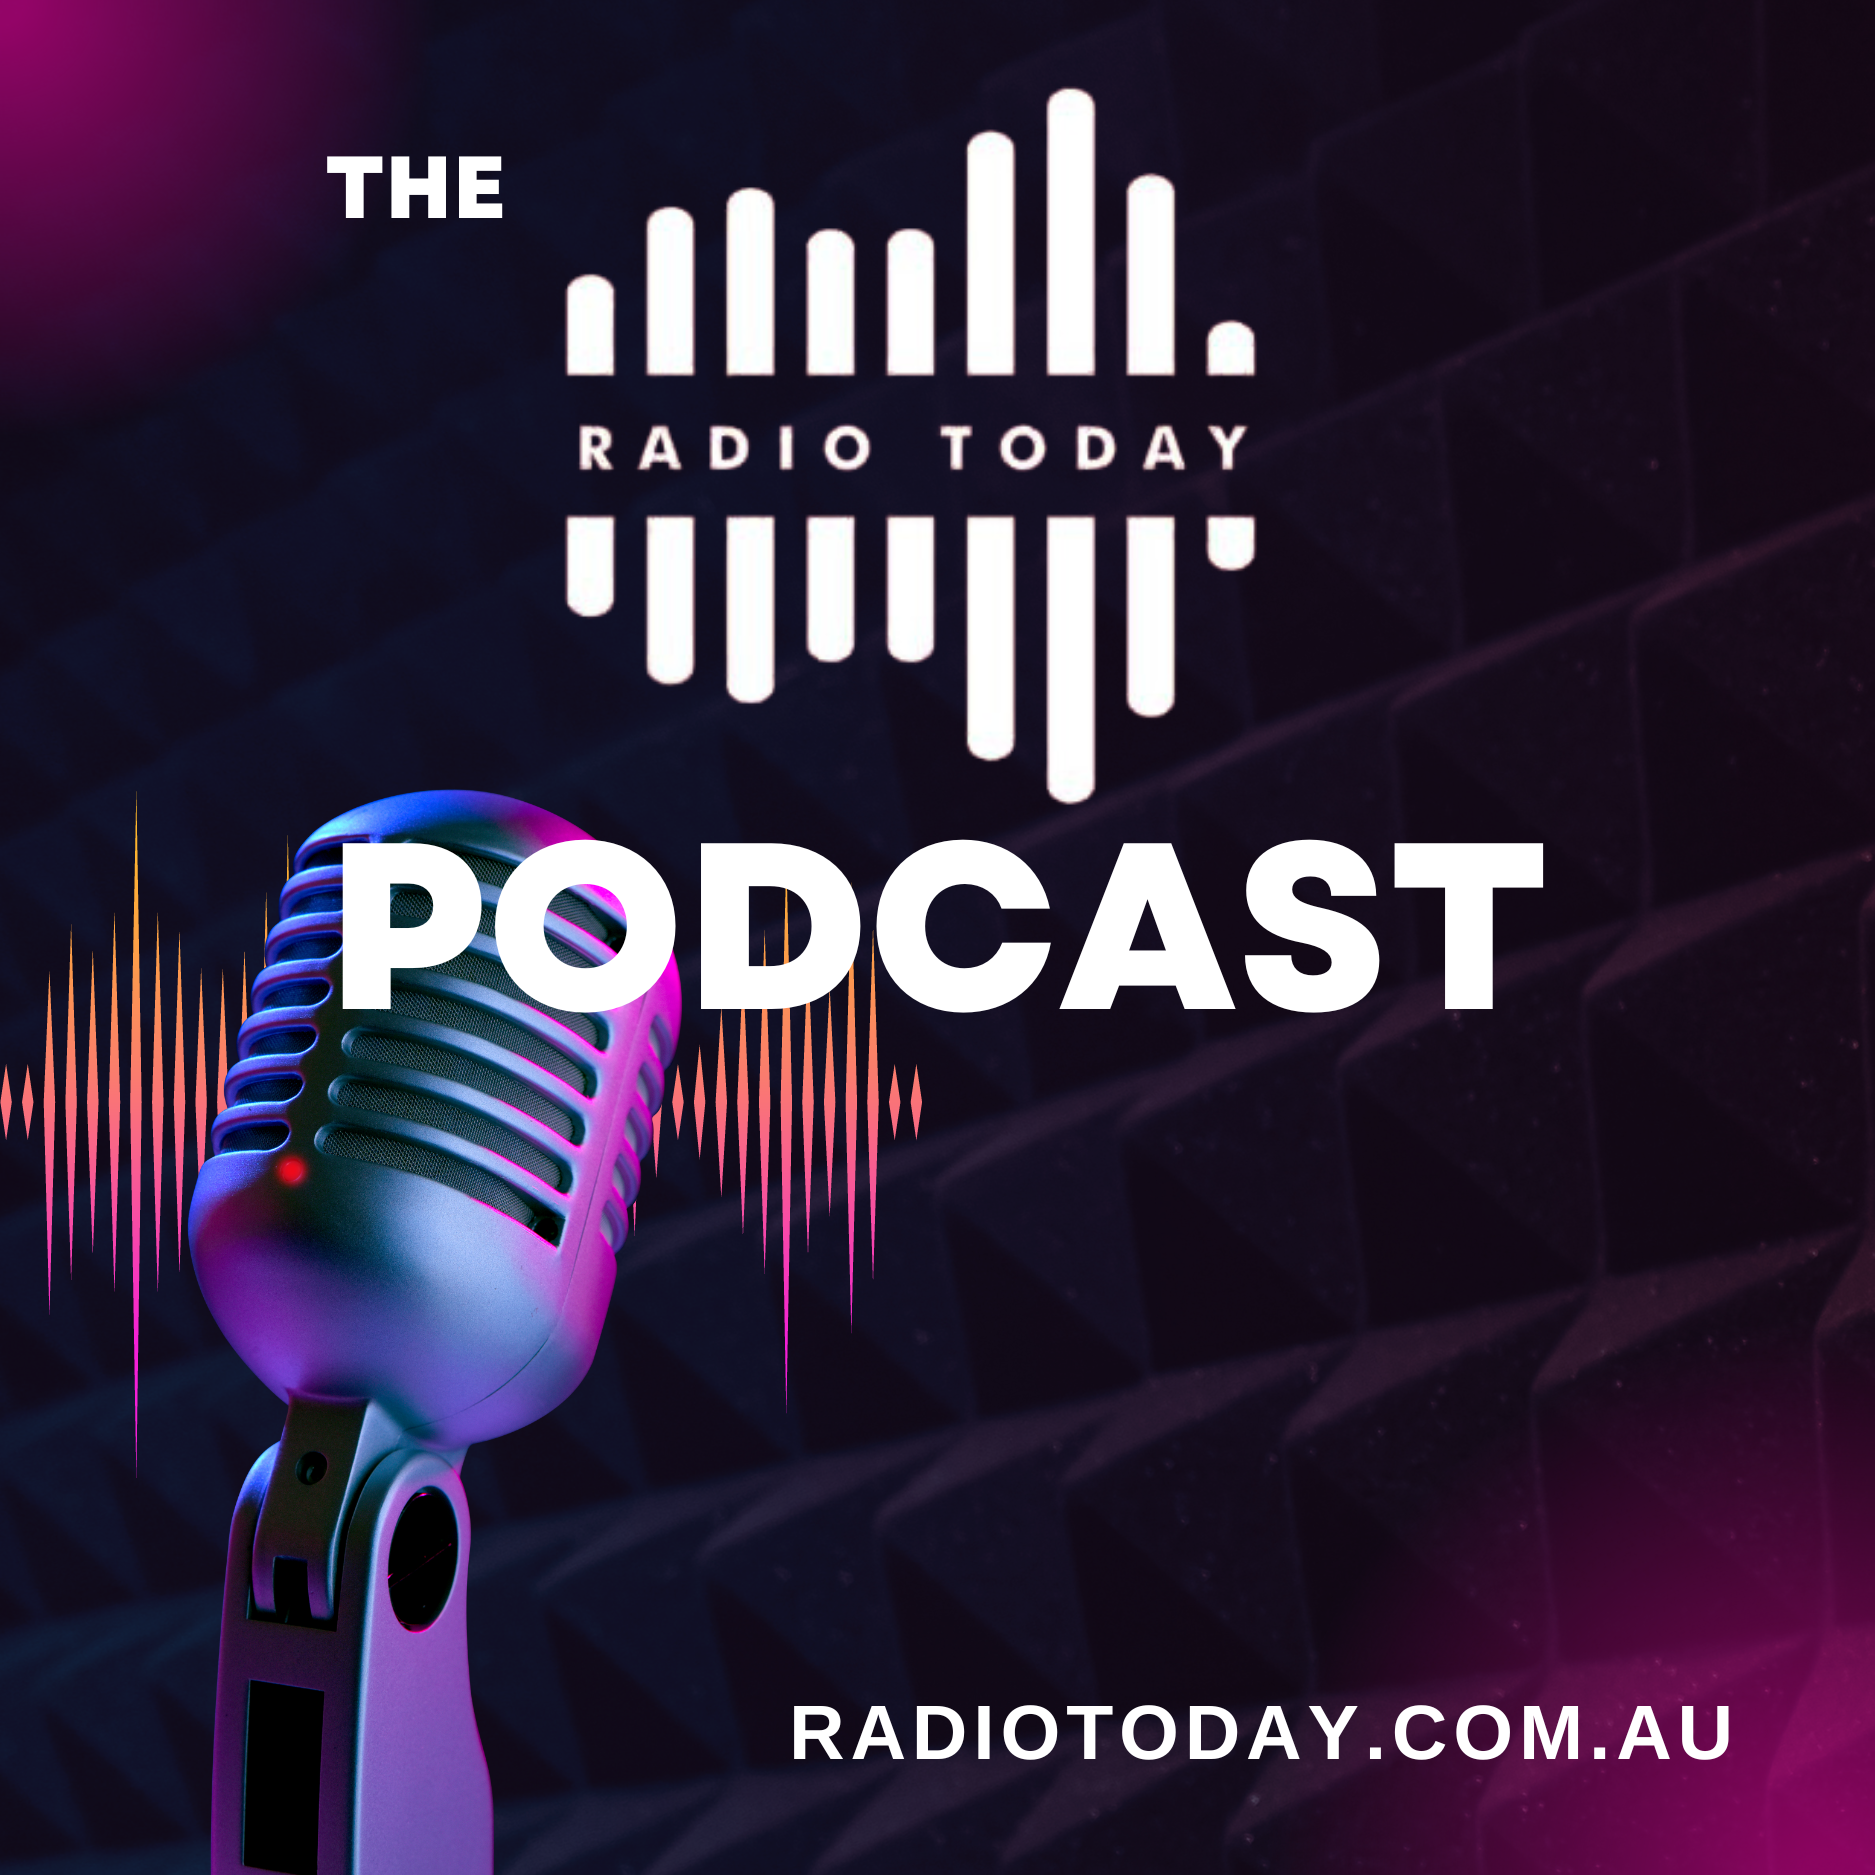 Radio Today: Melbourne Pulls Out the Big Bucks, SmartLess Gets Picked Up for $100M + more!